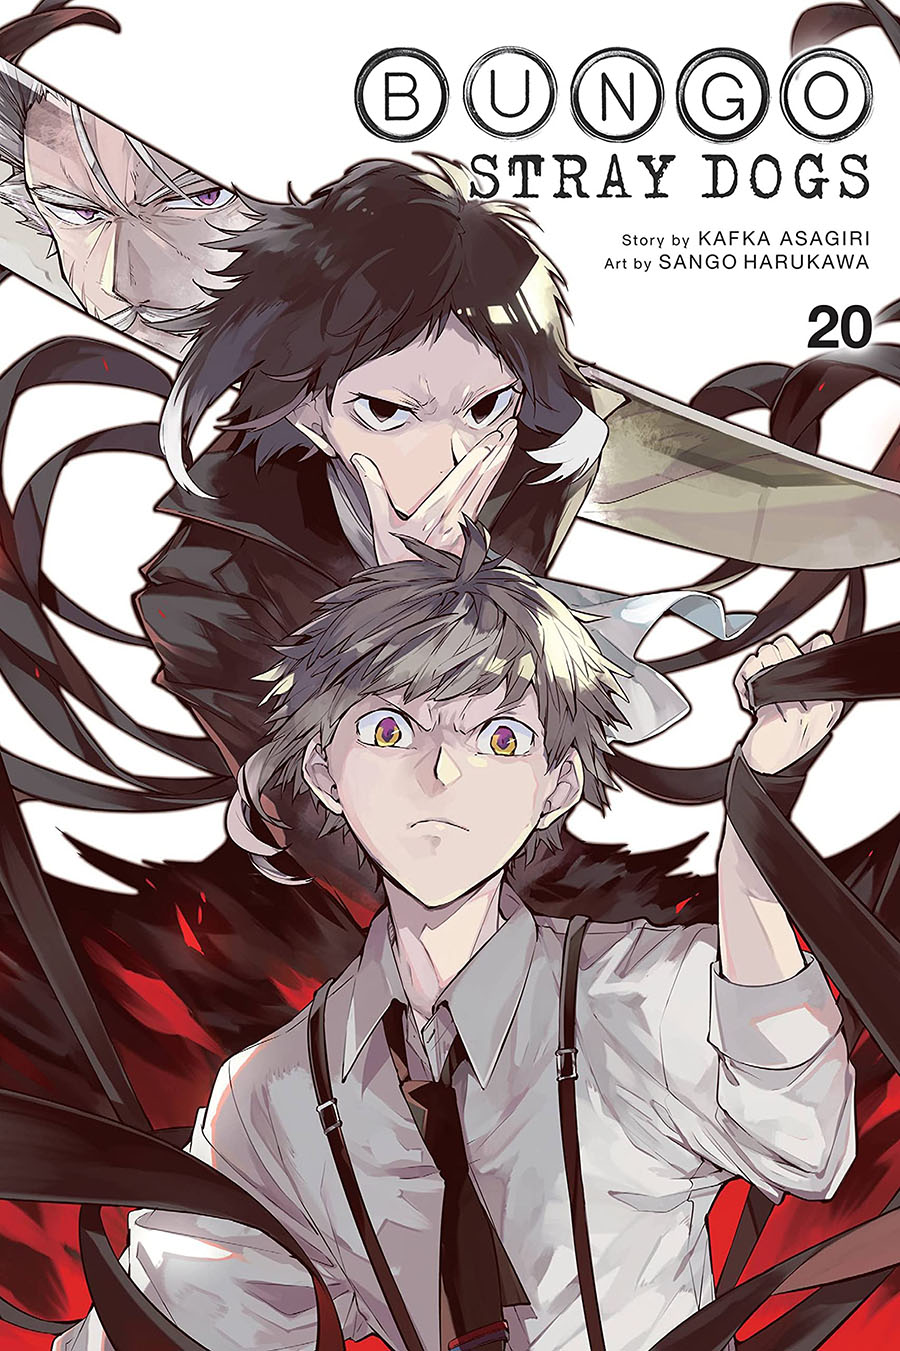 Bungo Stray Dogs Vol 20 GN